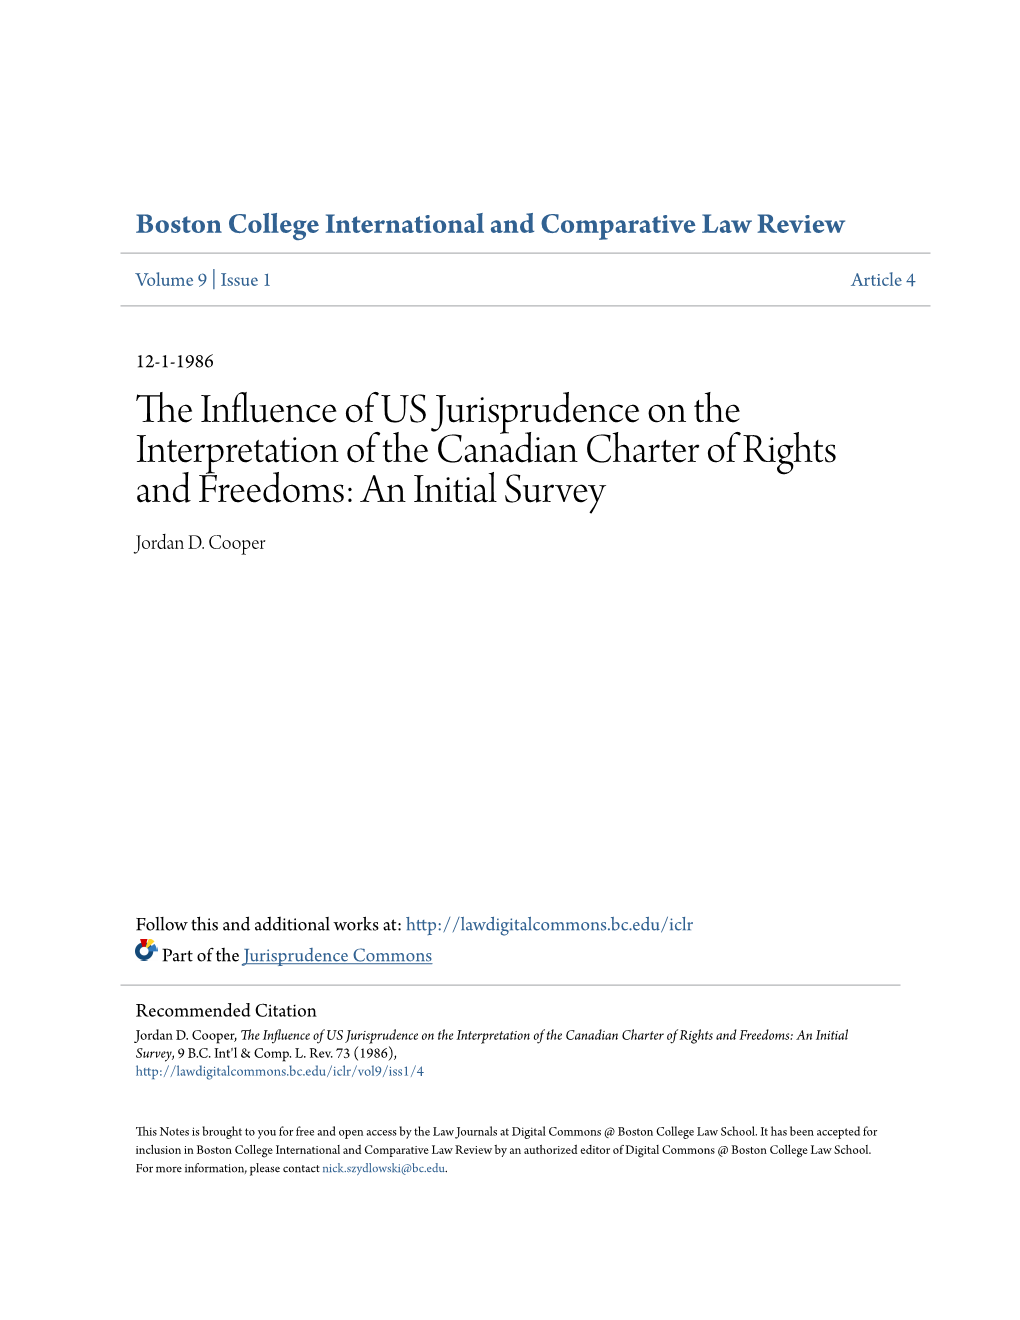 The Influence of US Jurisprudence on the Interpretation of the Canadian Charter of Rights and Freedoms: an Initial Survey, 9 B.C